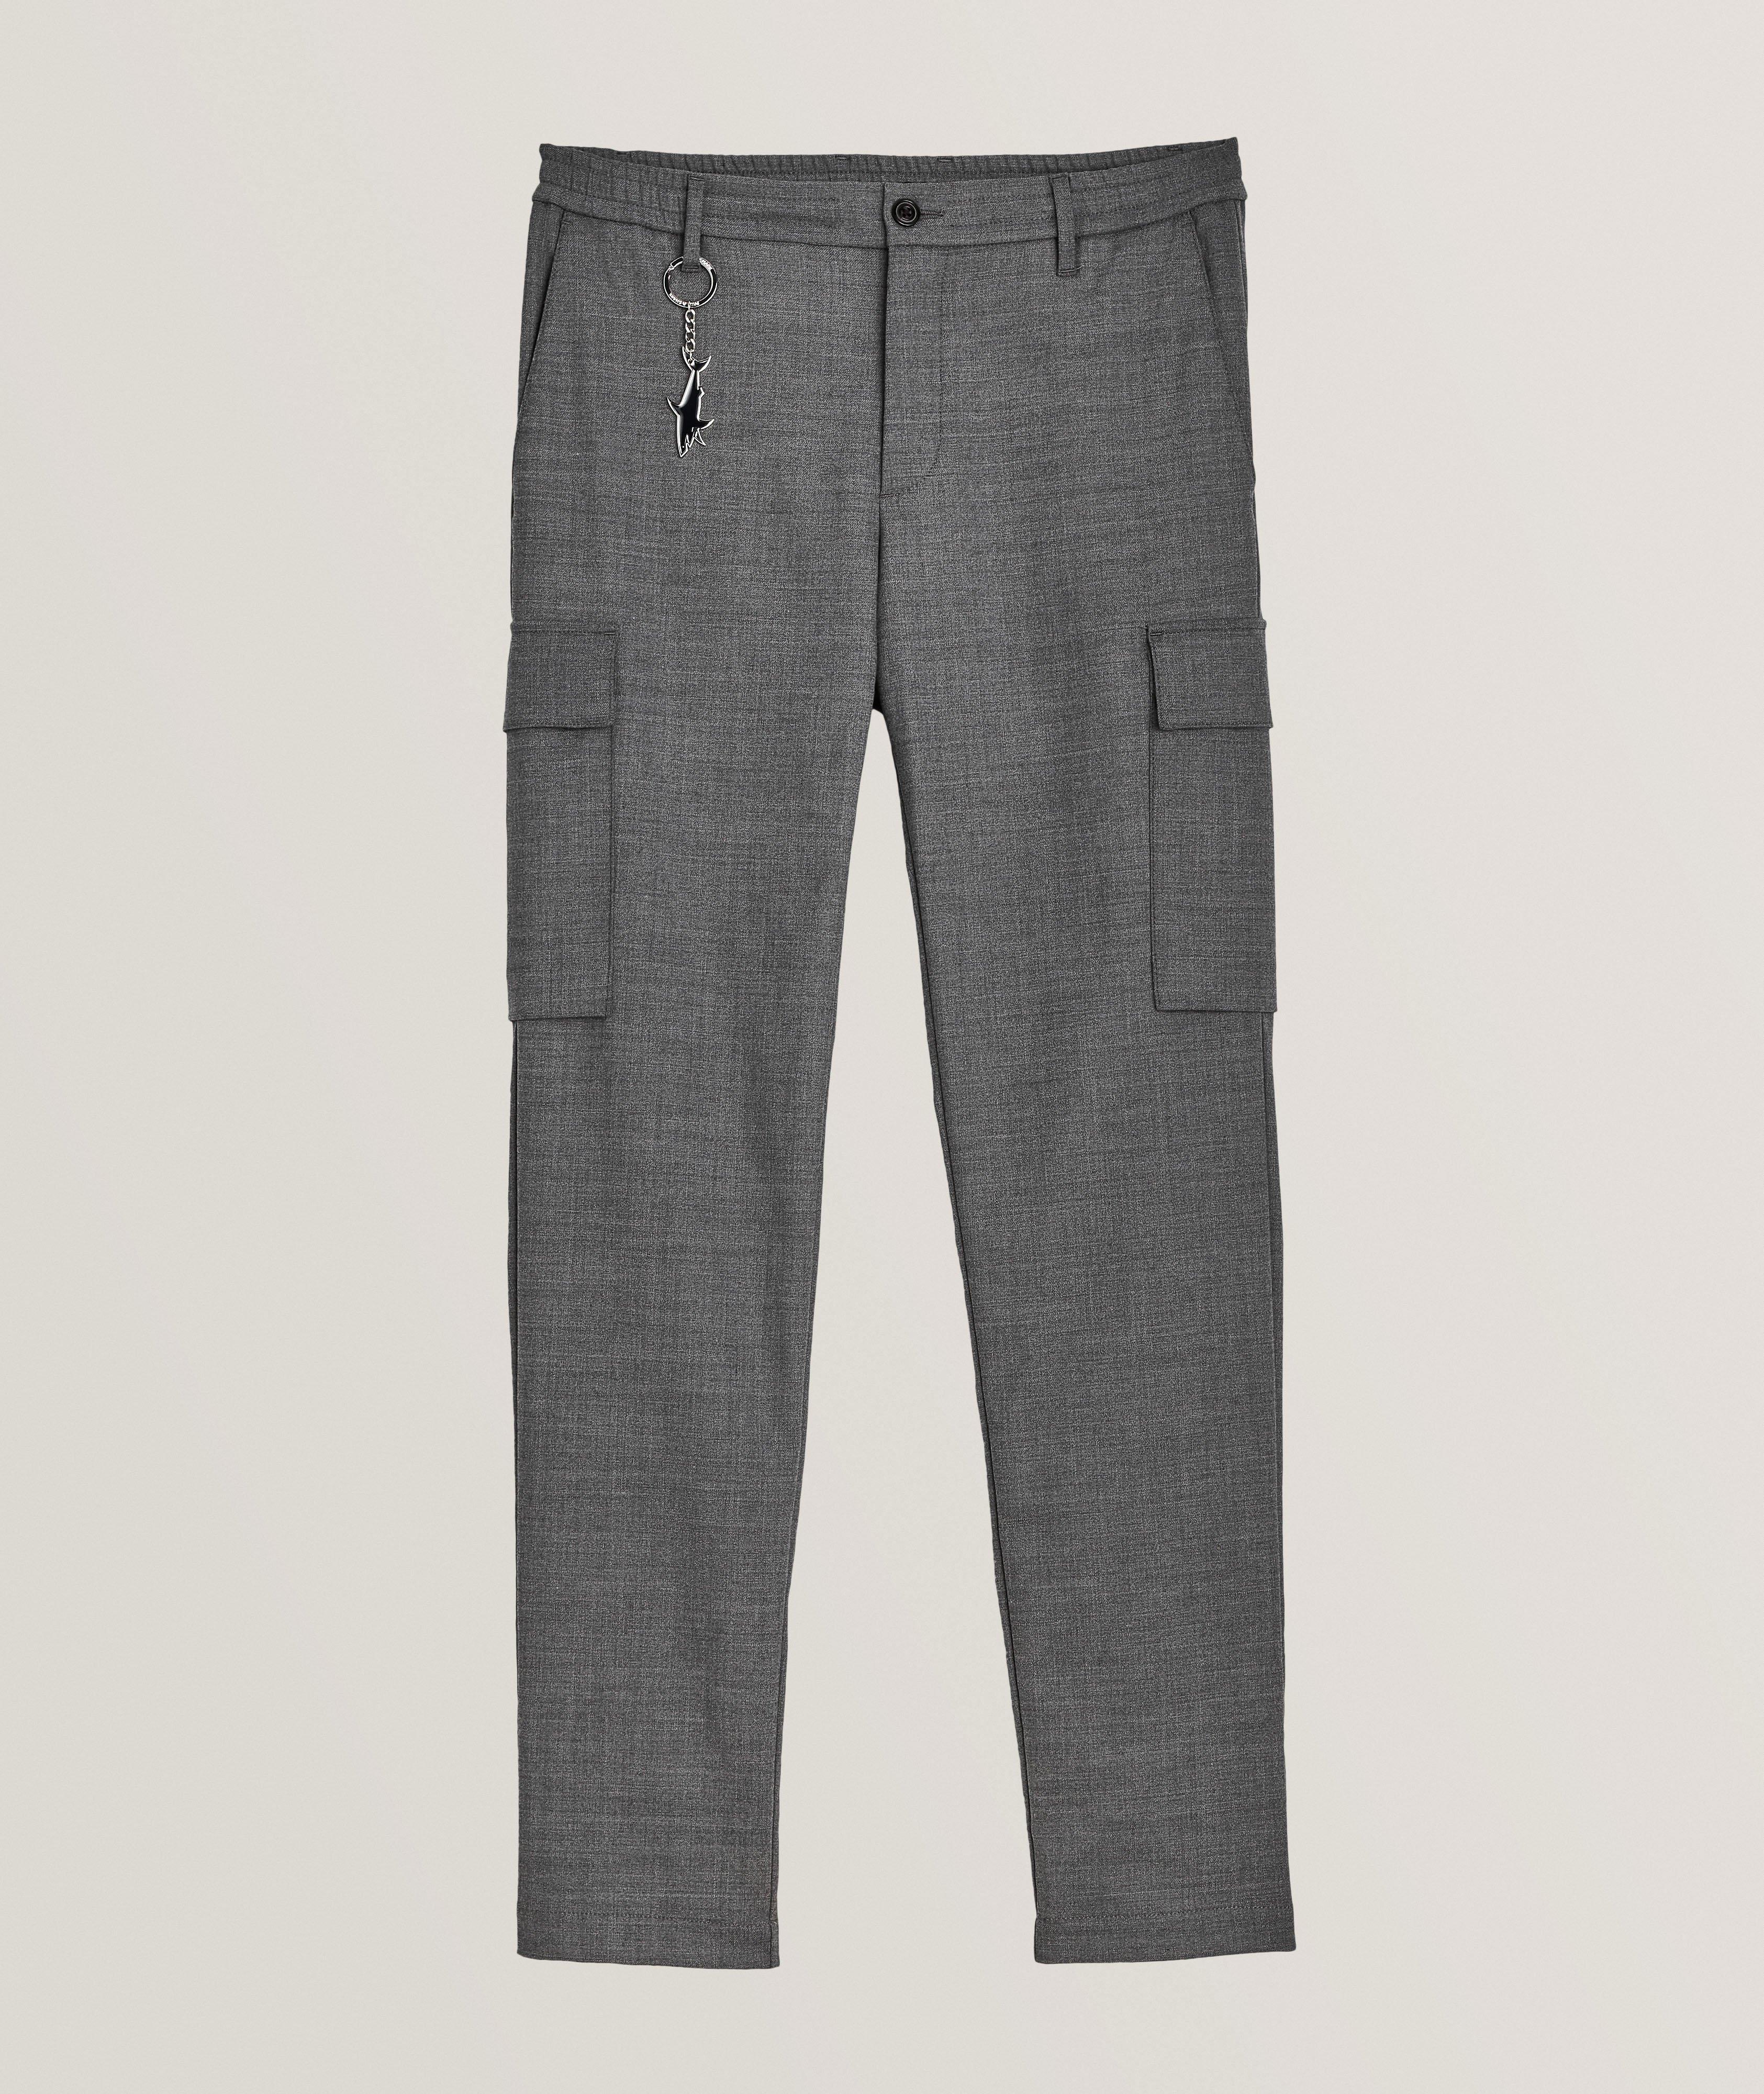 Technical Stretch Cargo Pants image 0